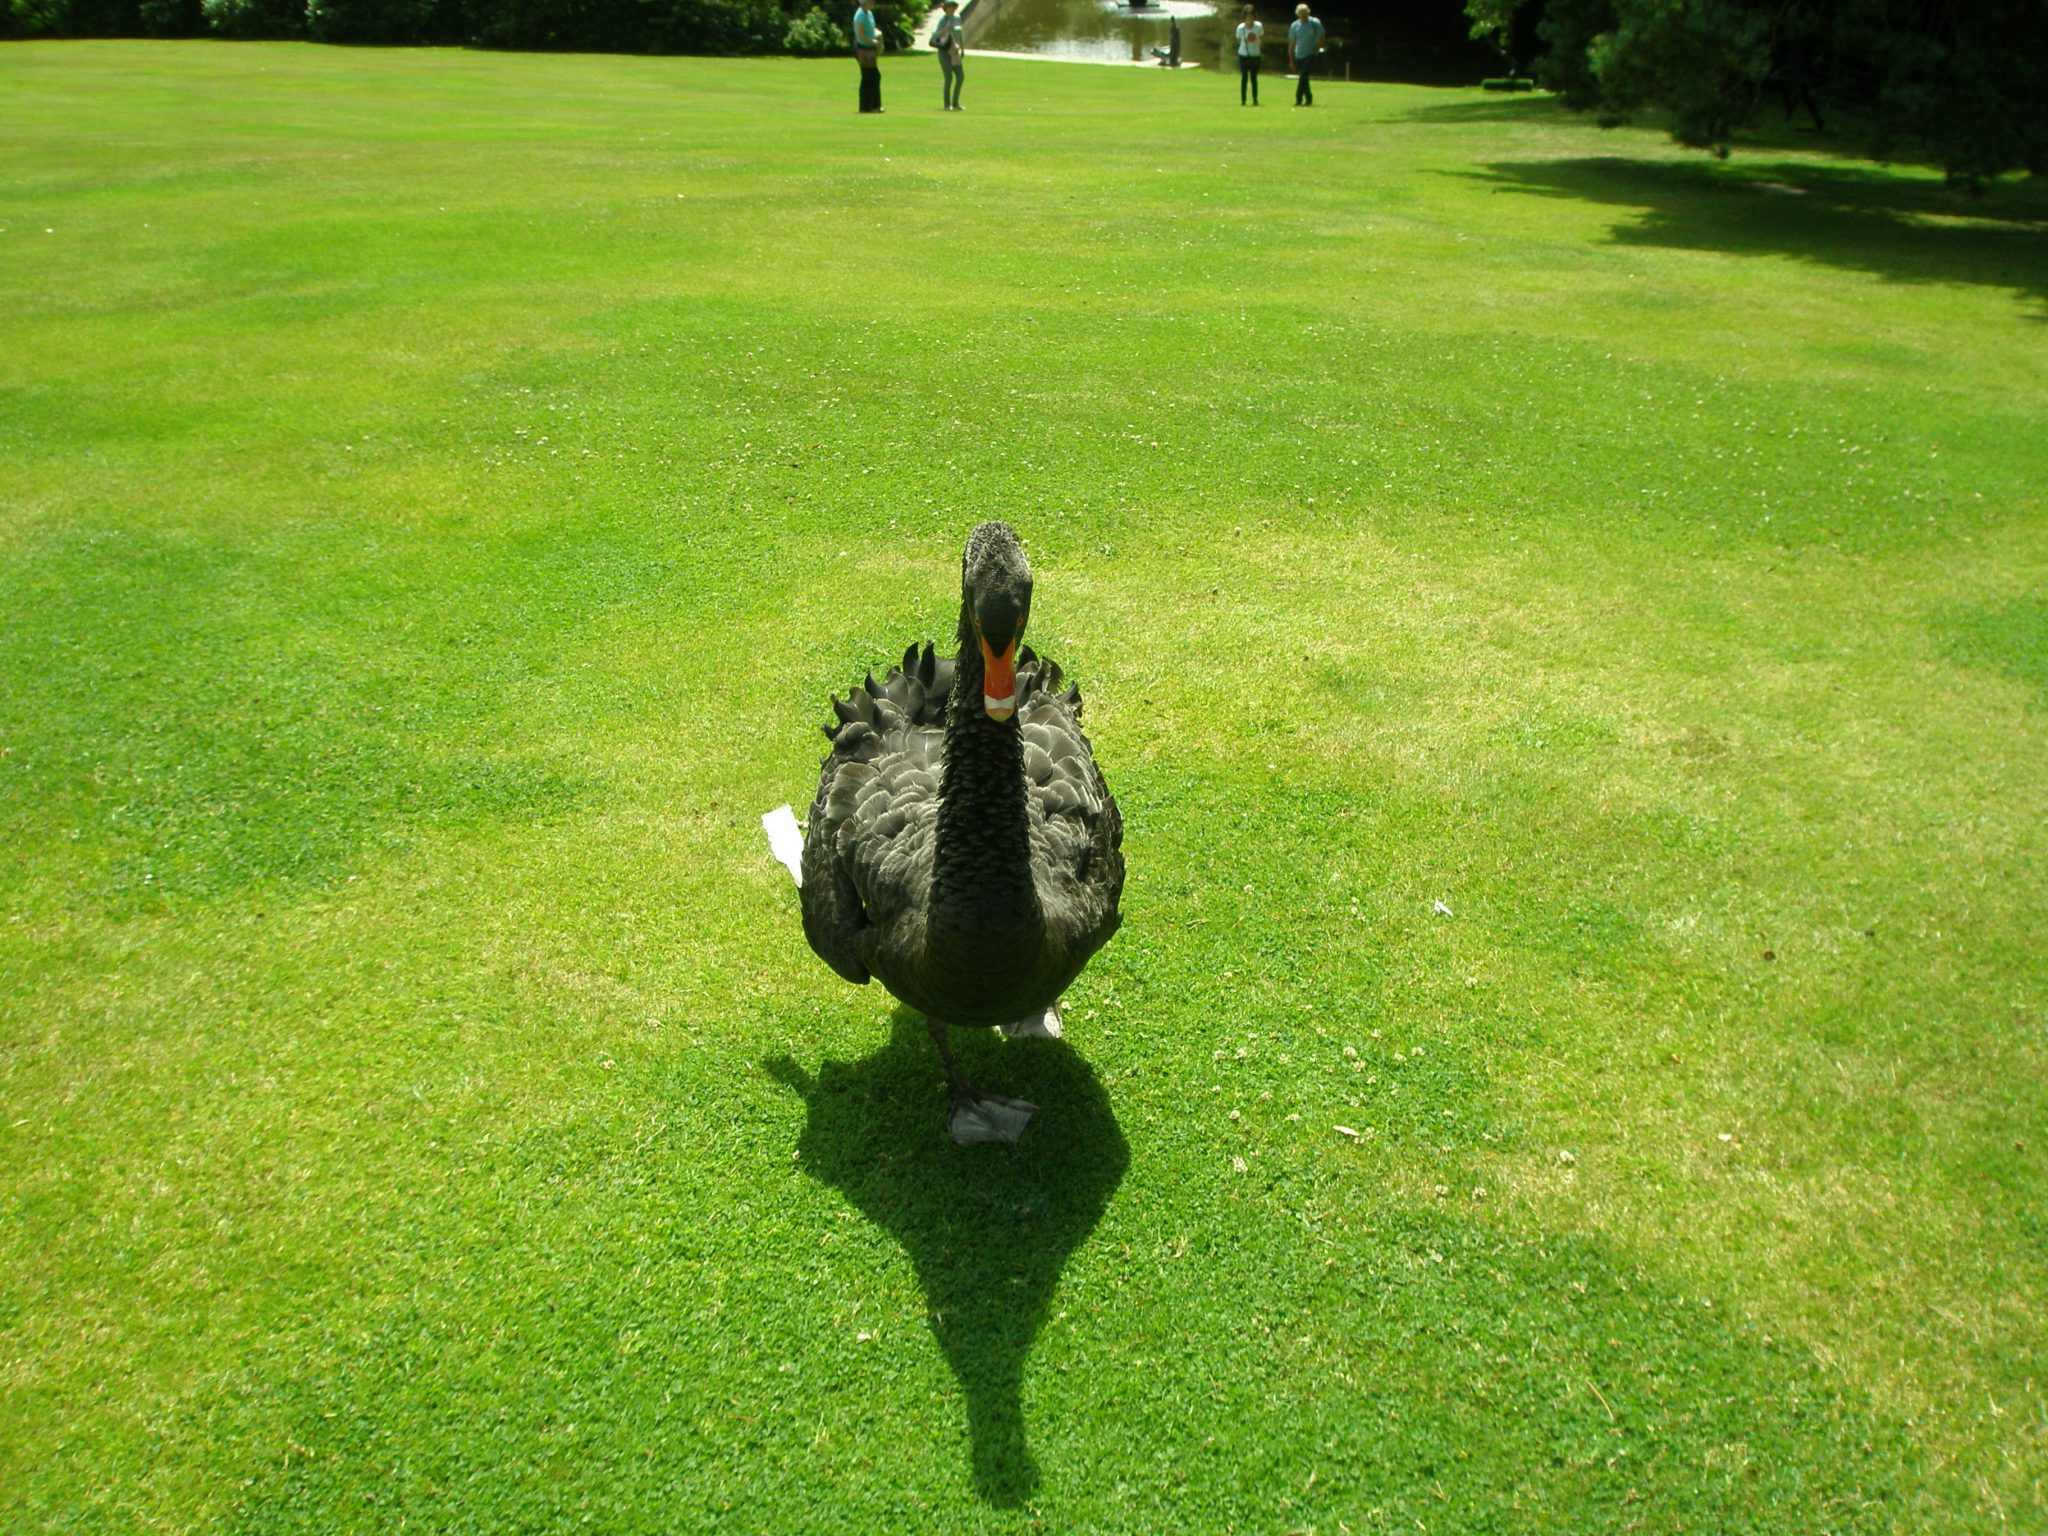 A Black Swan waddles across the Lawn that overlooks the Old Moat